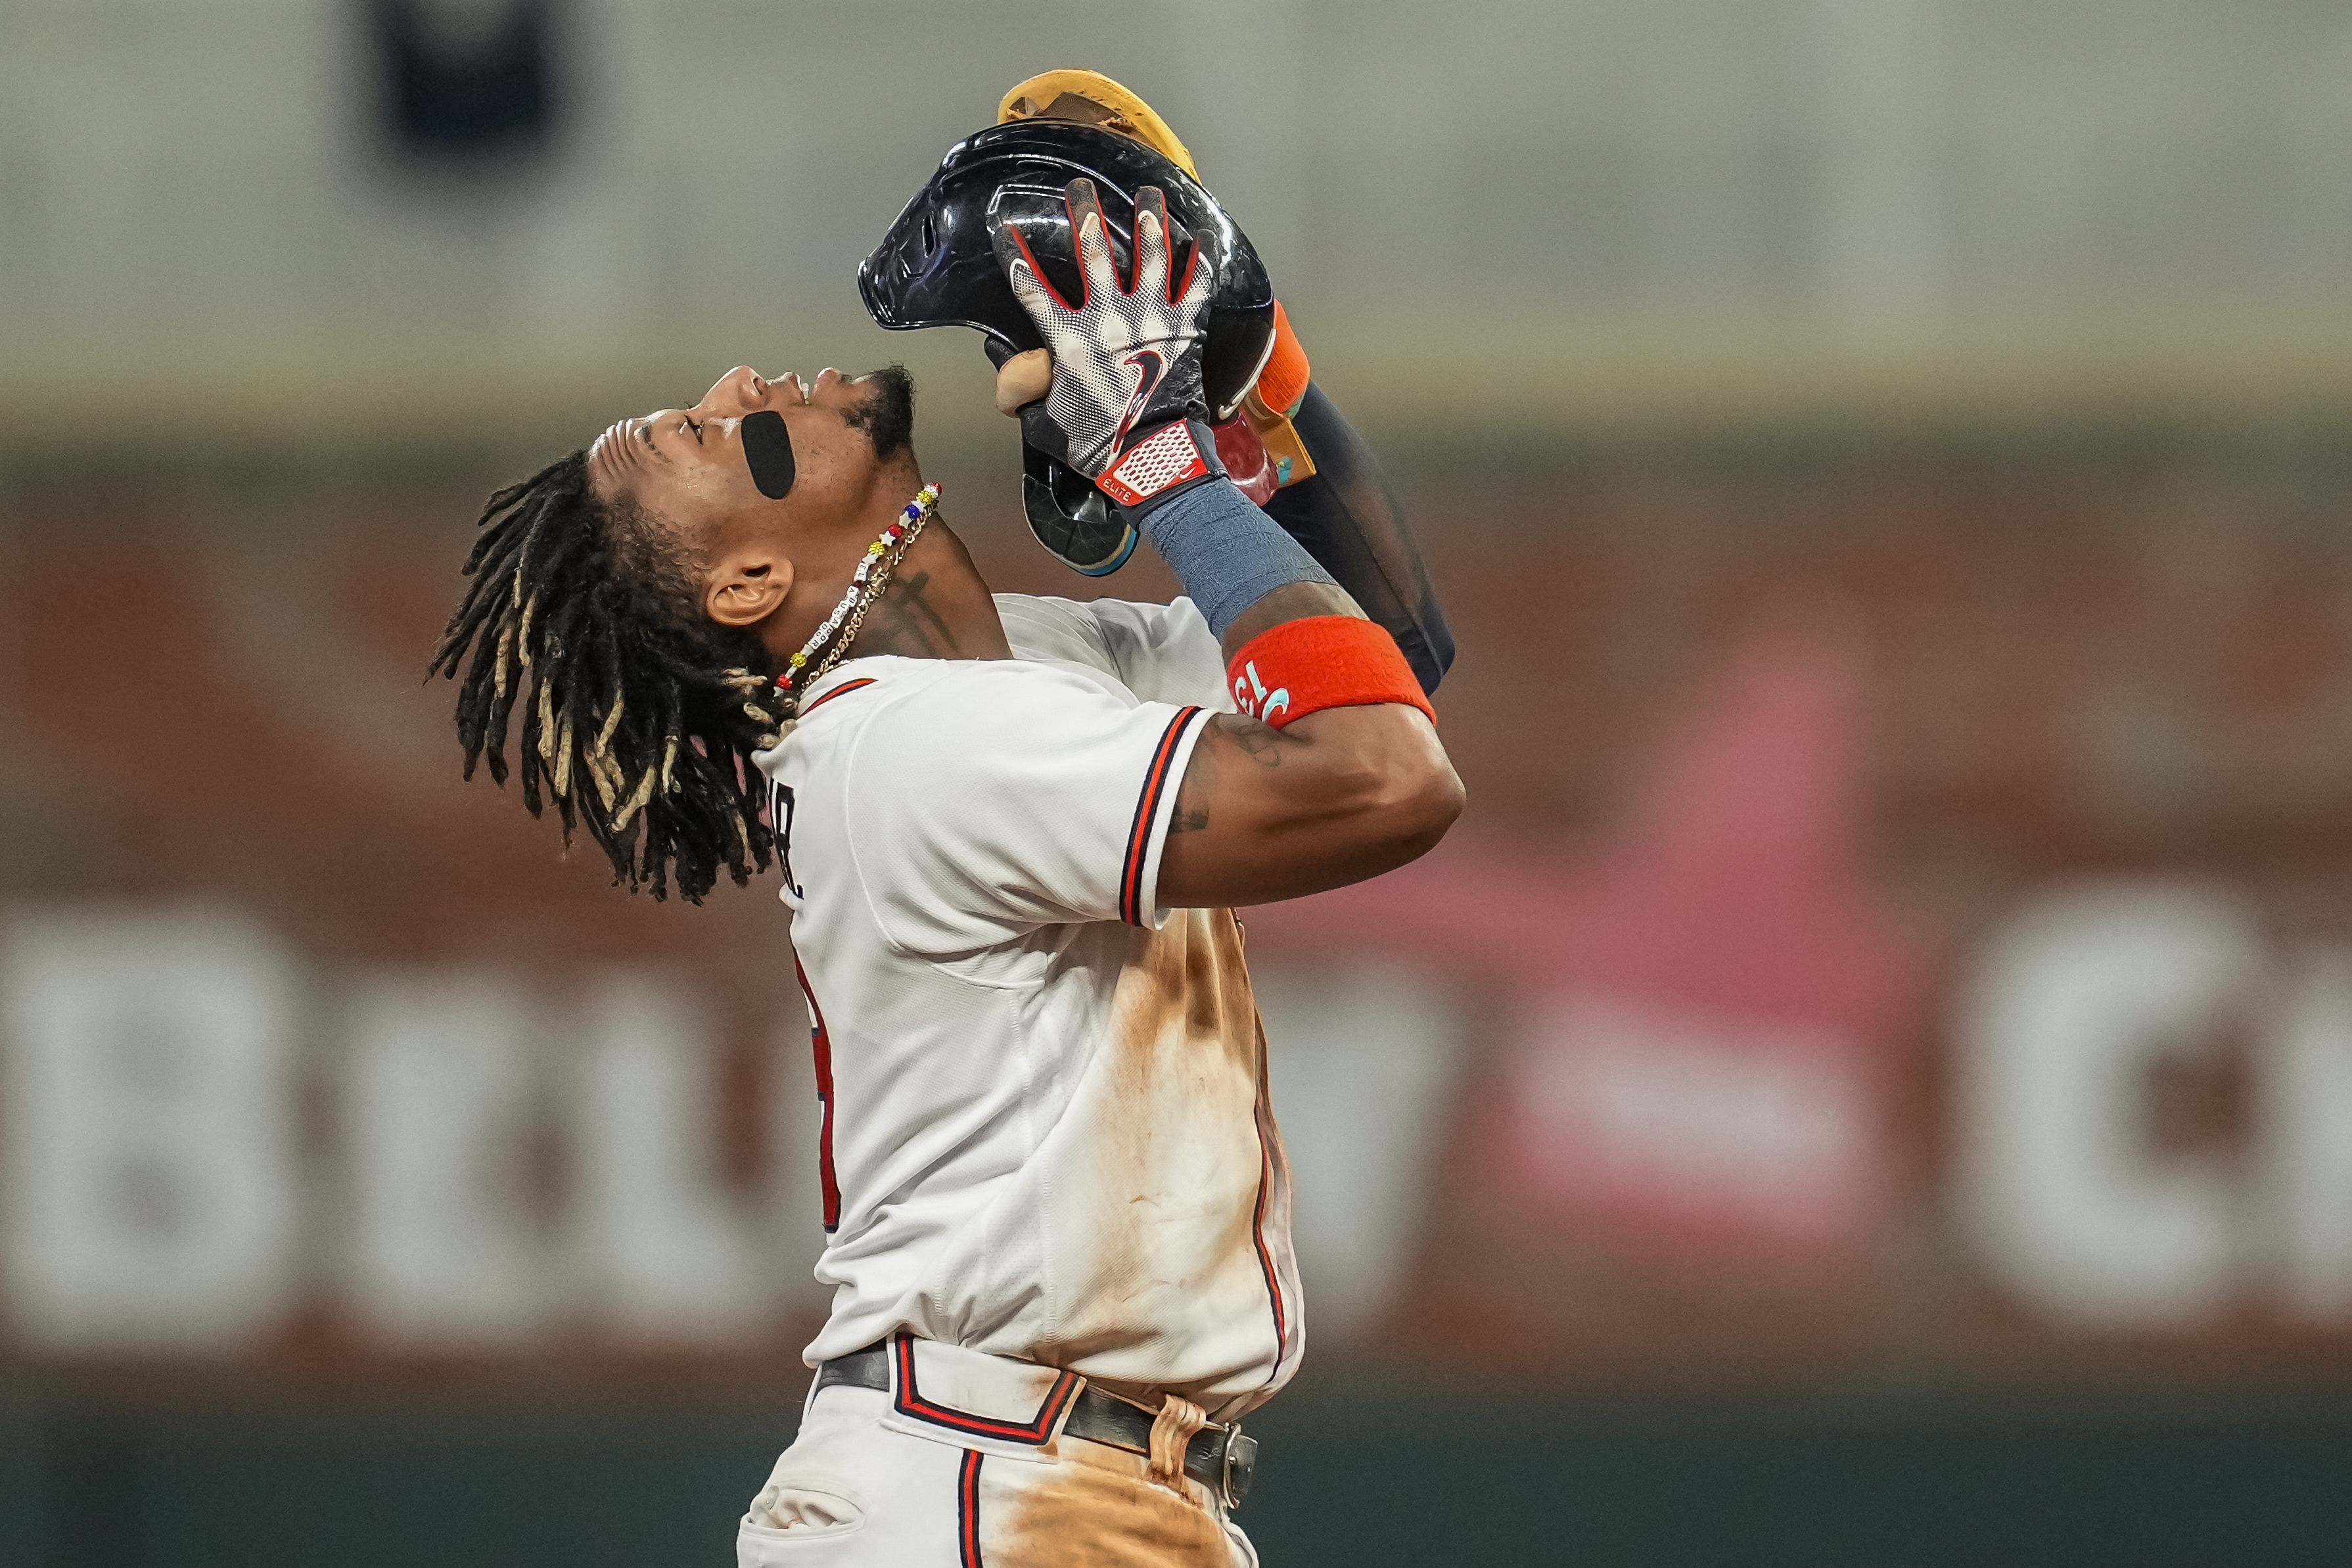 Braves outfielder Ronald Acuña Jr. steals 70th base to make